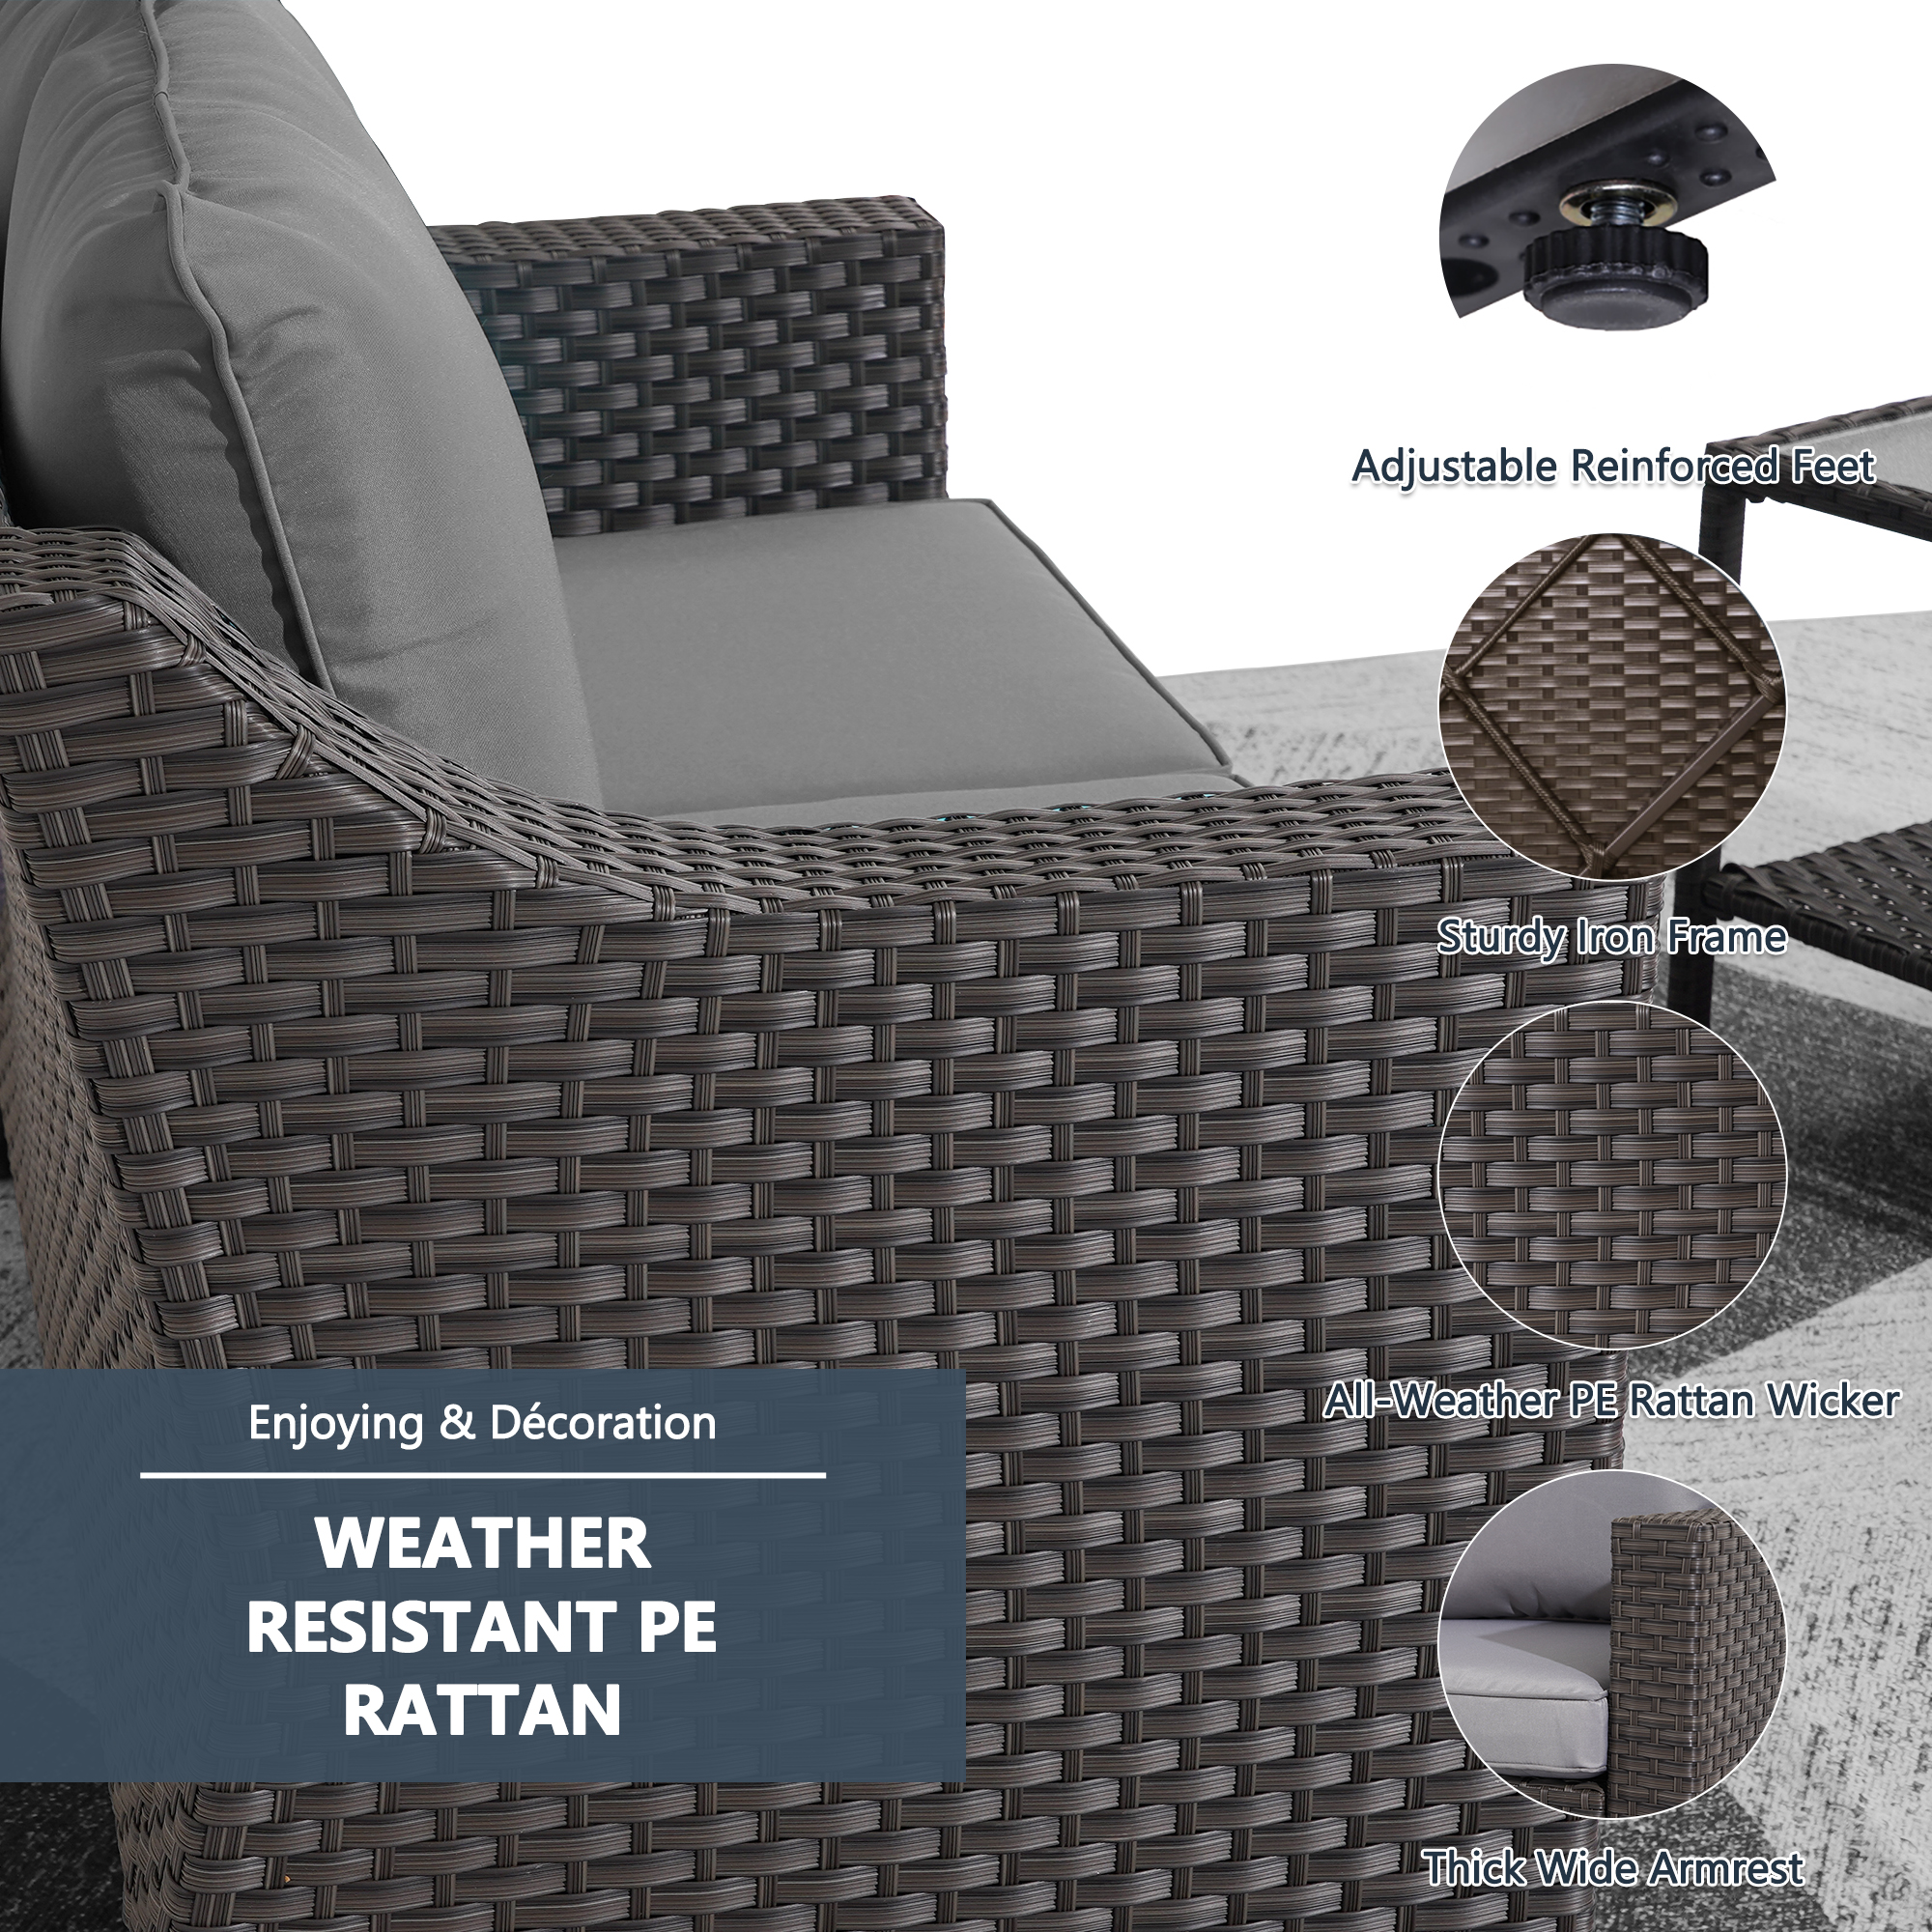 Superjoe 5 Pcs Patio Furniture Sets Outdoor Wicker Lounge Chair with Ottomans and Coffee Table, Gray - image 3 of 8